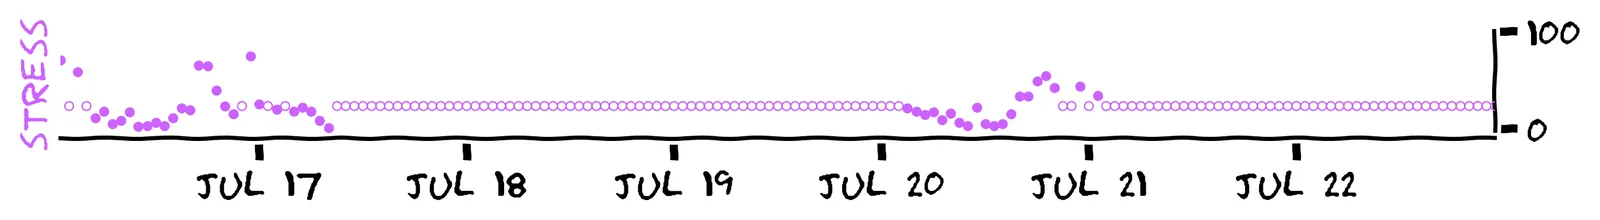 The previous plot of time vs stress measurements, with more points added. Where there were gaps before, there is a long horizontal line of outlined purple points.